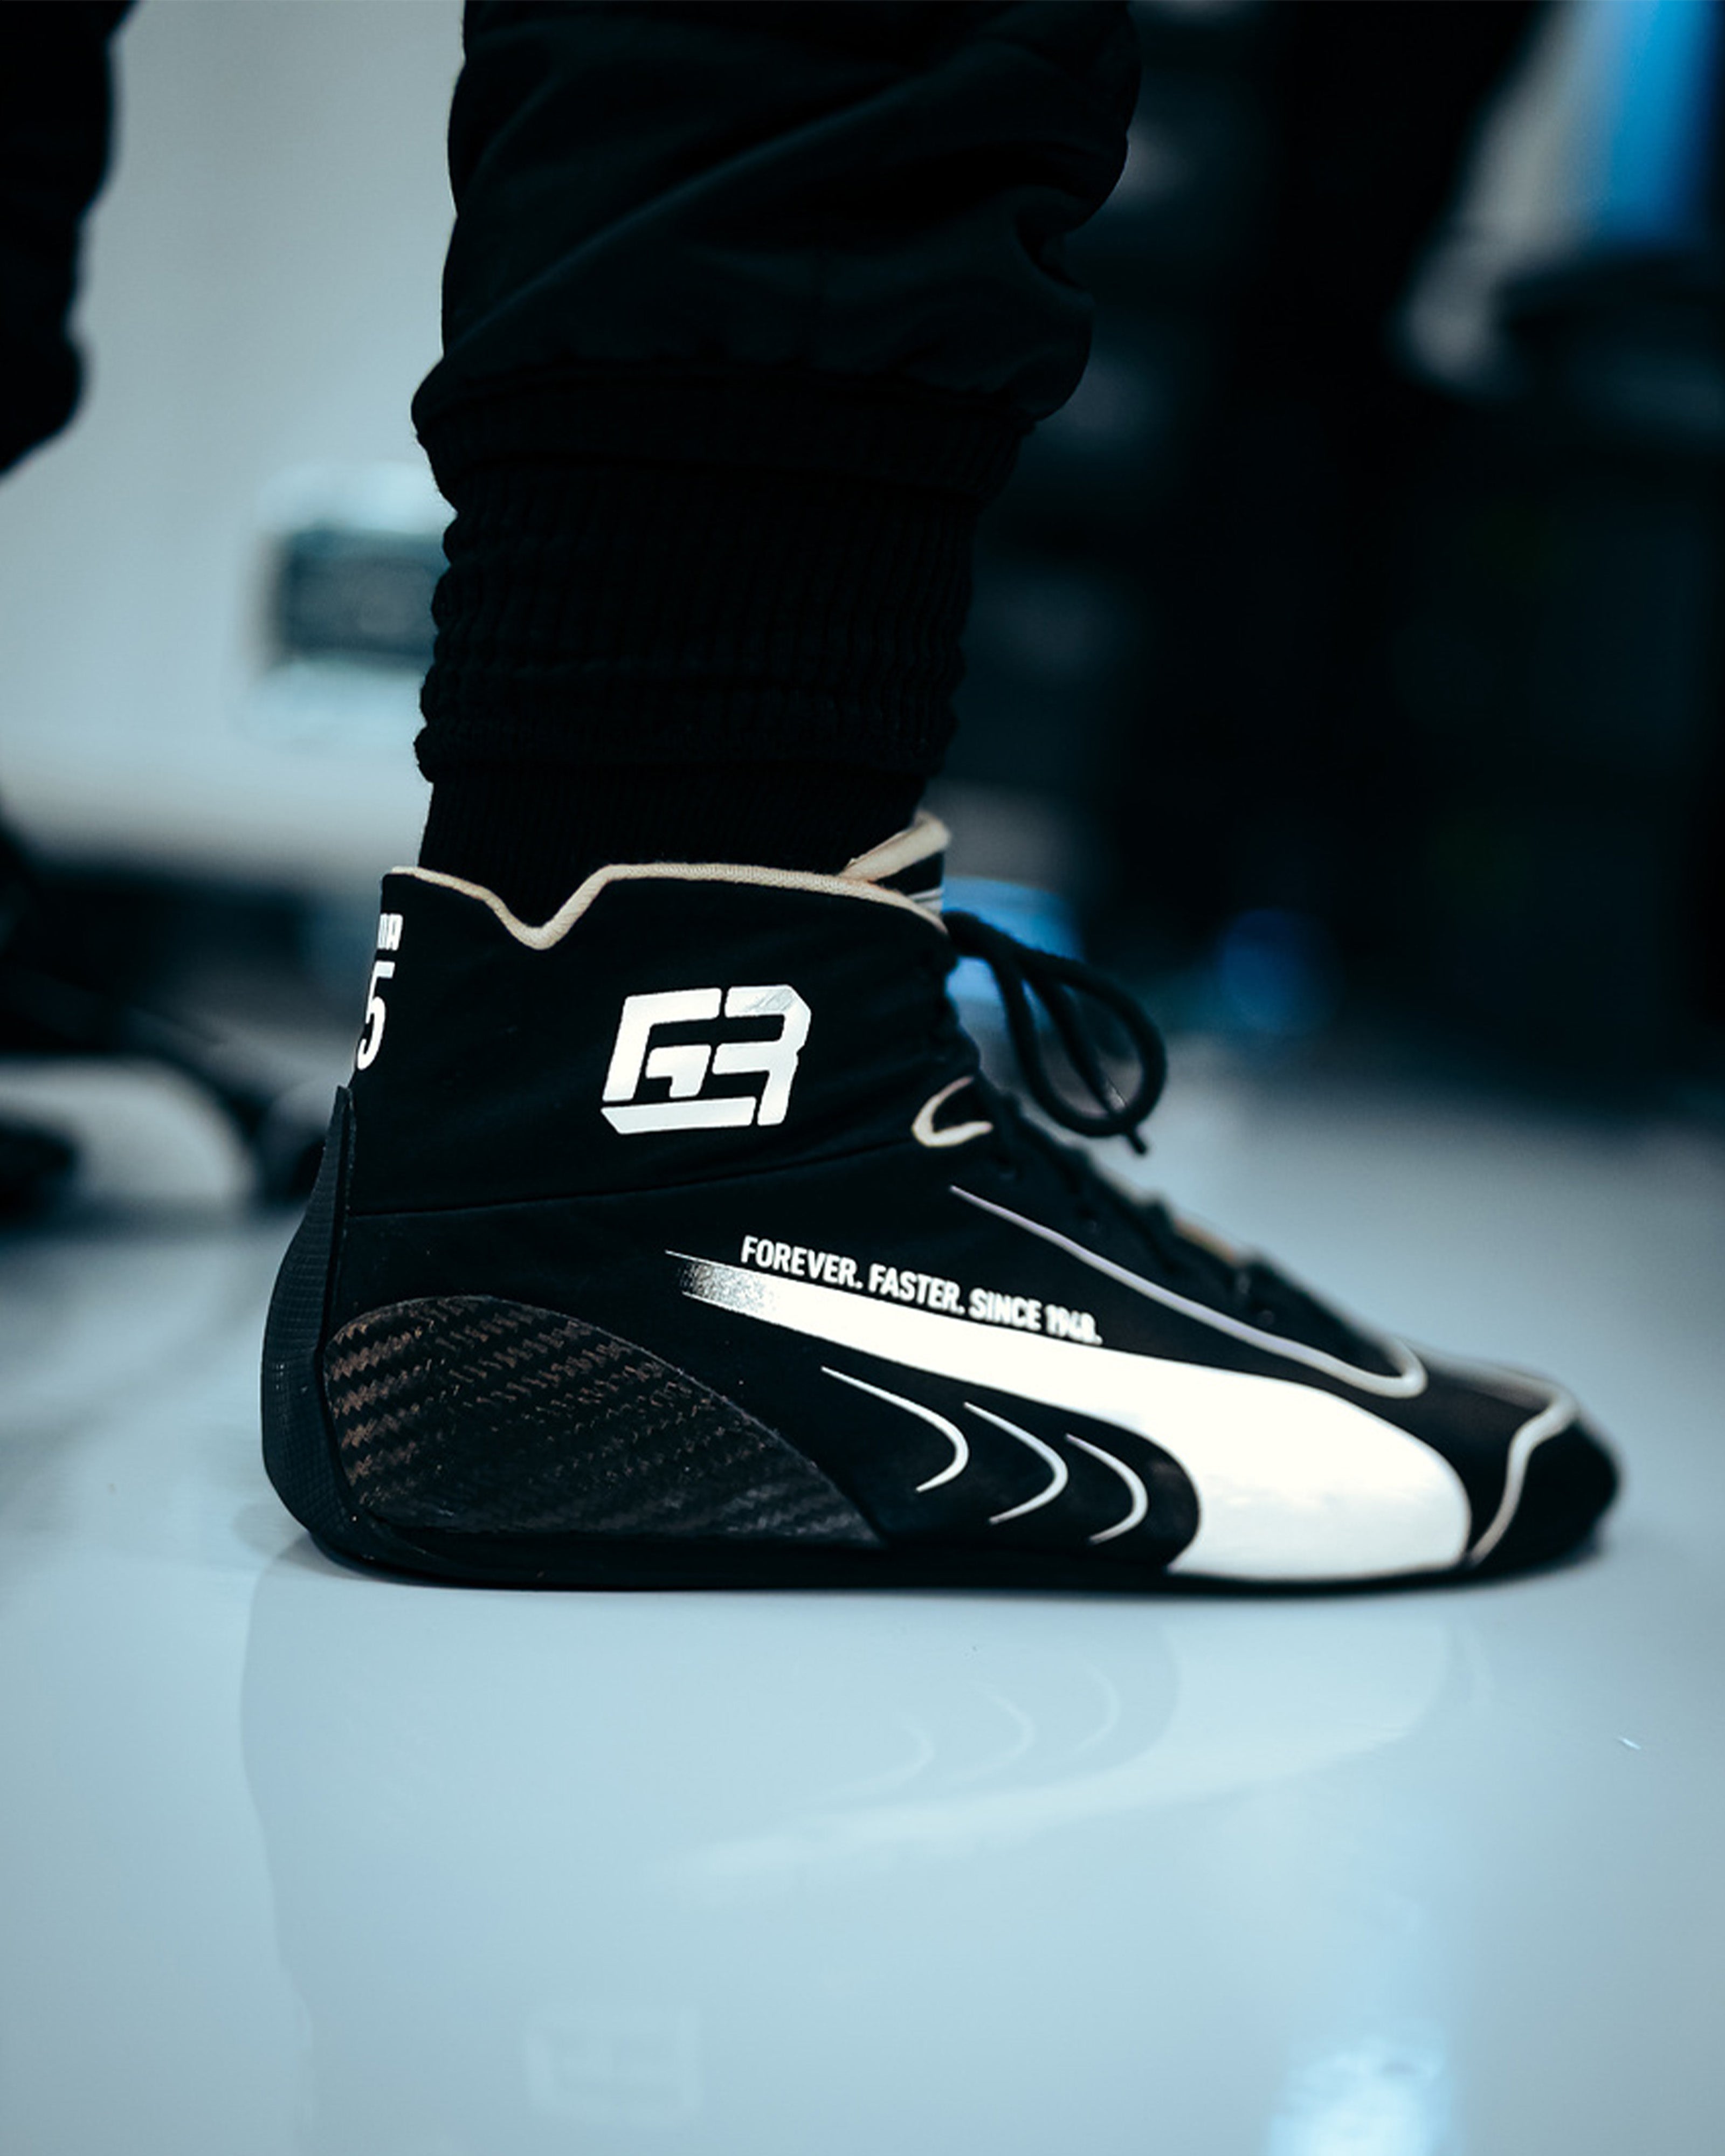 Speedcat Pro George Russell 75 Year Driving Shoes